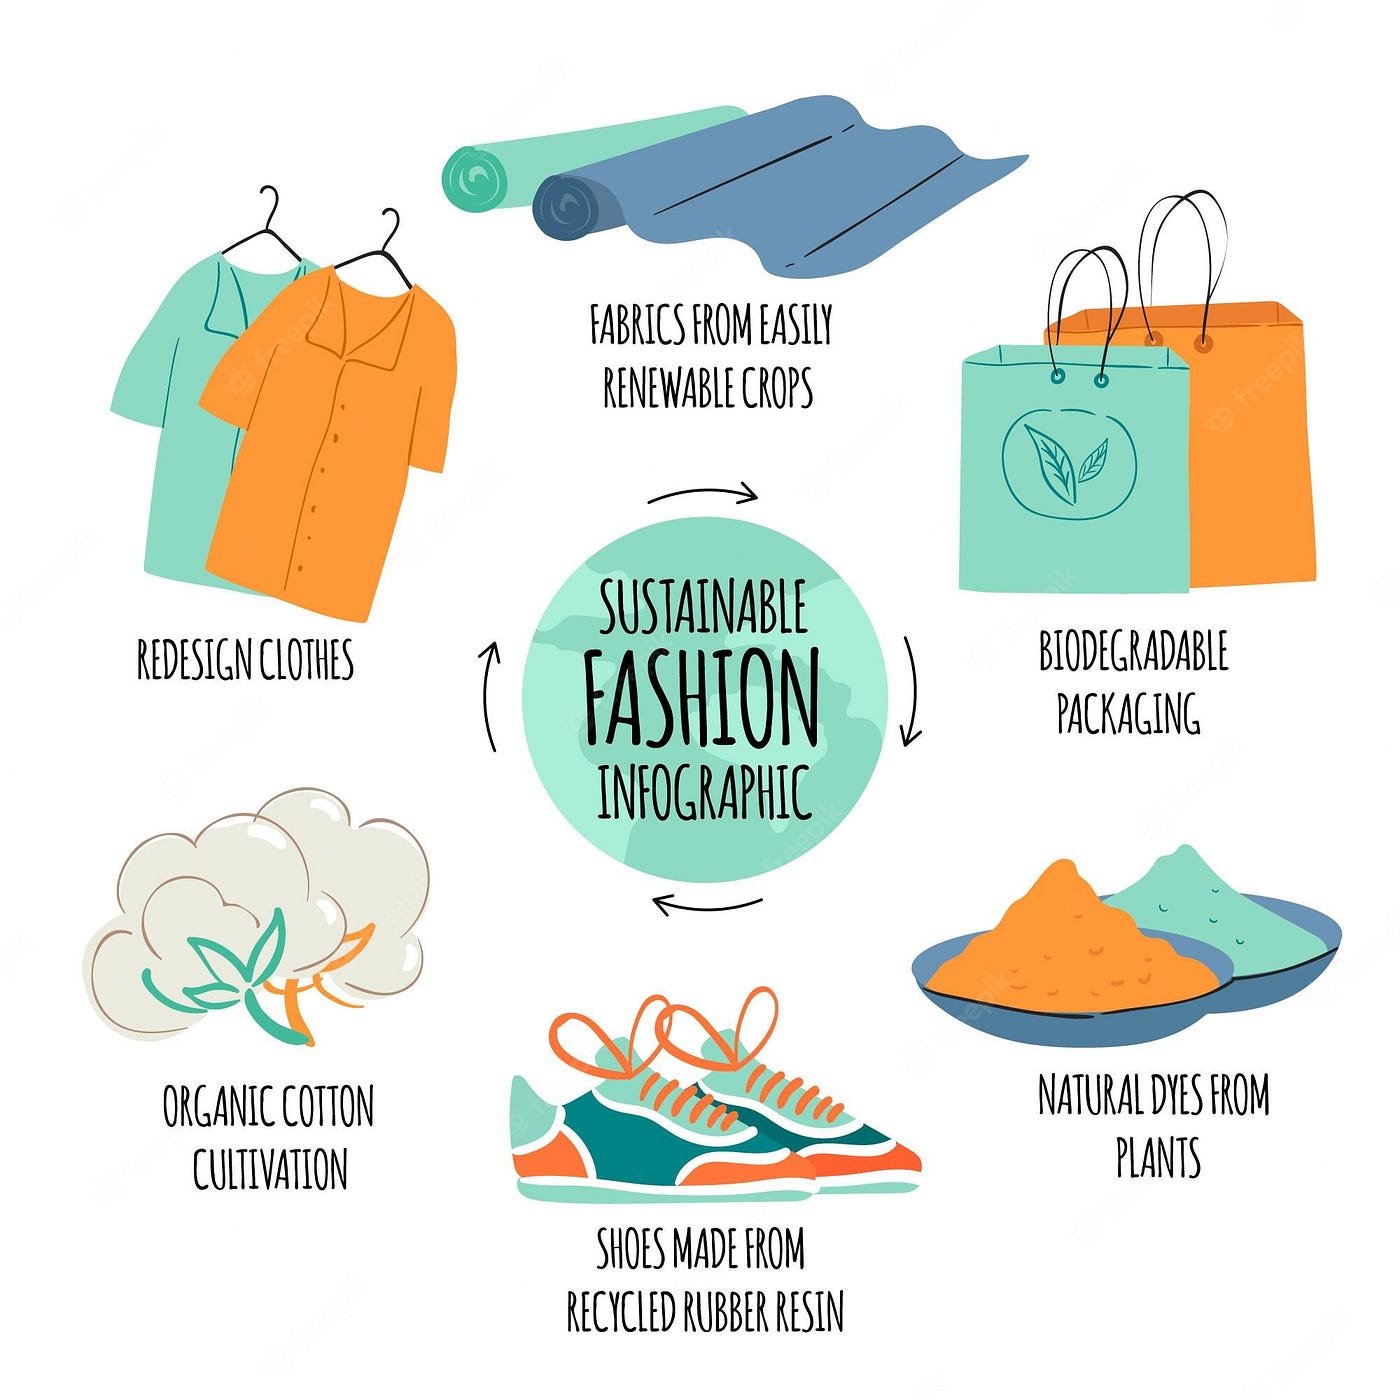 Eco Friendly Clothing - What Are the Benefits of Wearing Eco